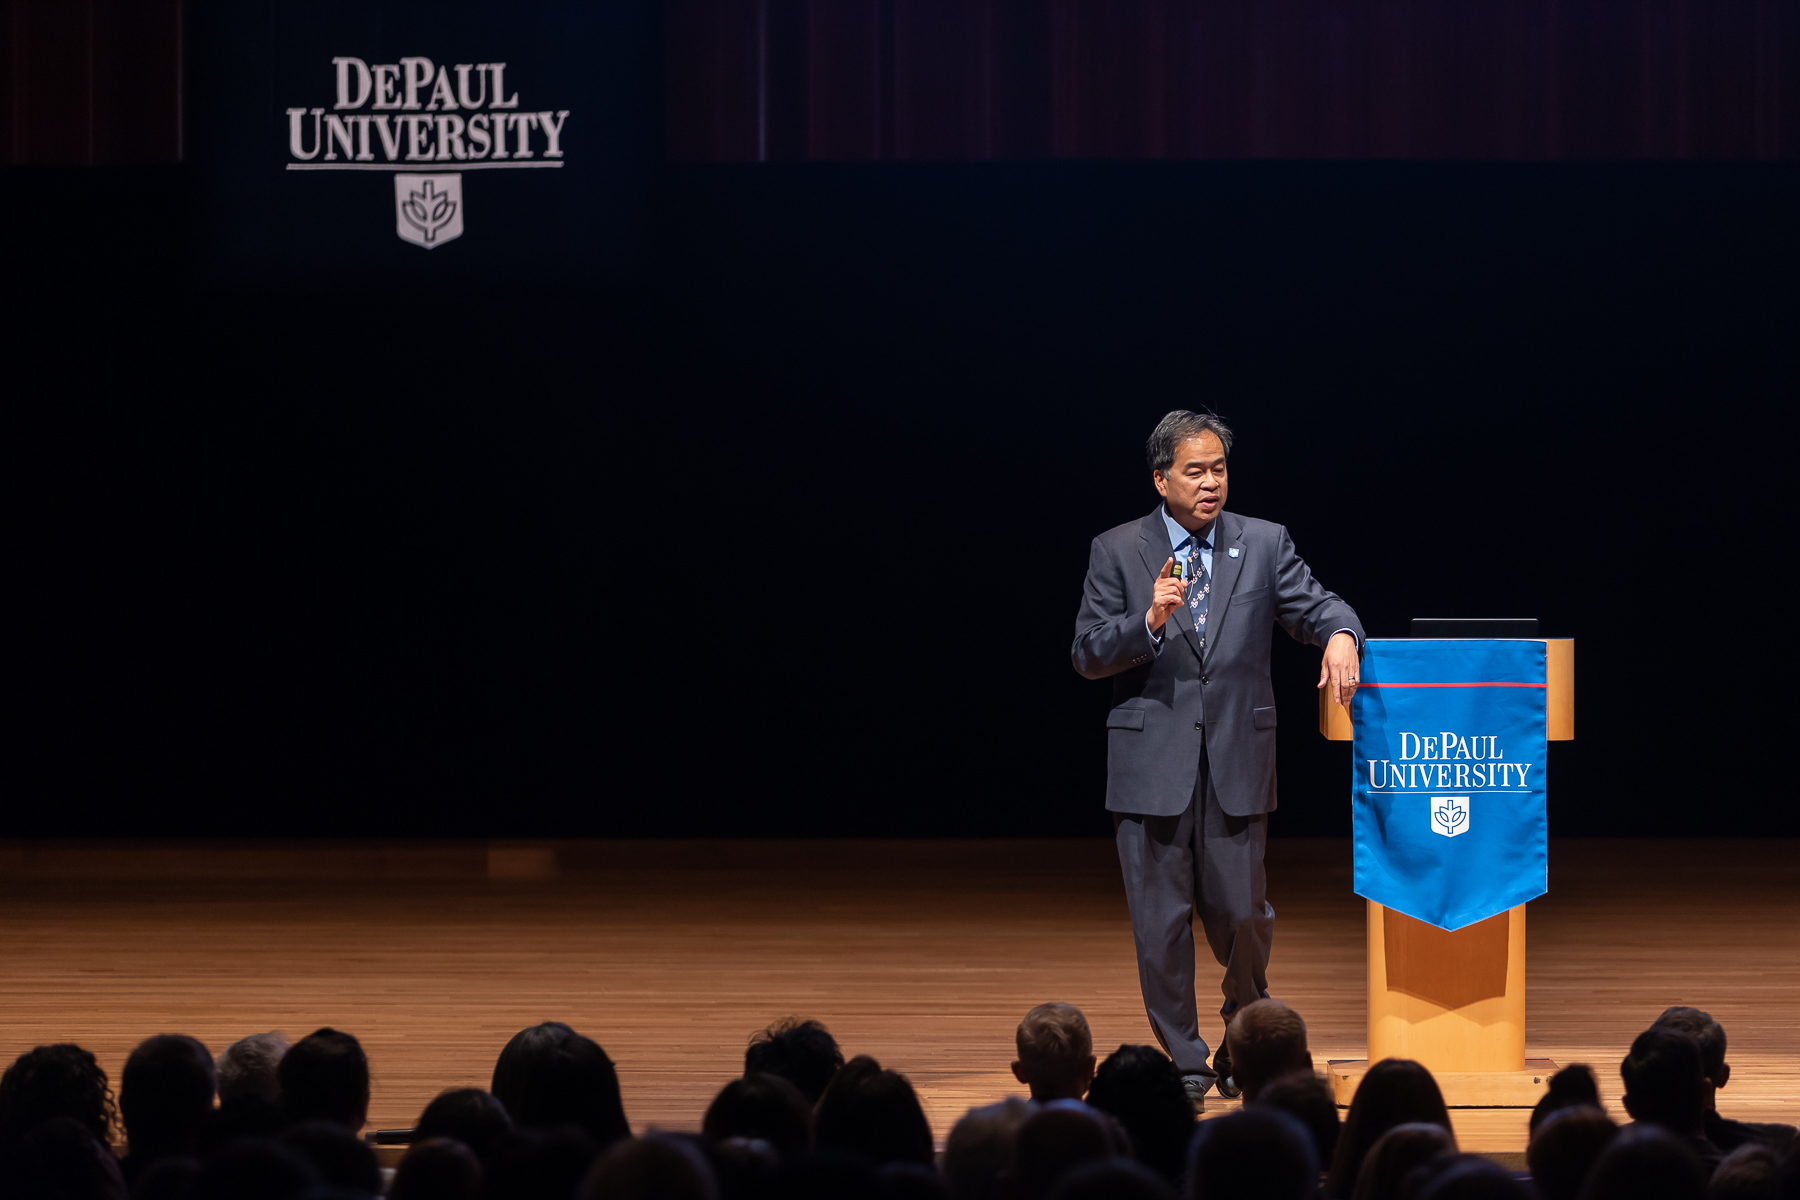 A.Gabriel Esteban, Ph.D., president of DePaul University, presents the State of the University address to faculty and staff members, October 4. (DePaul University/Jeff Carrion)